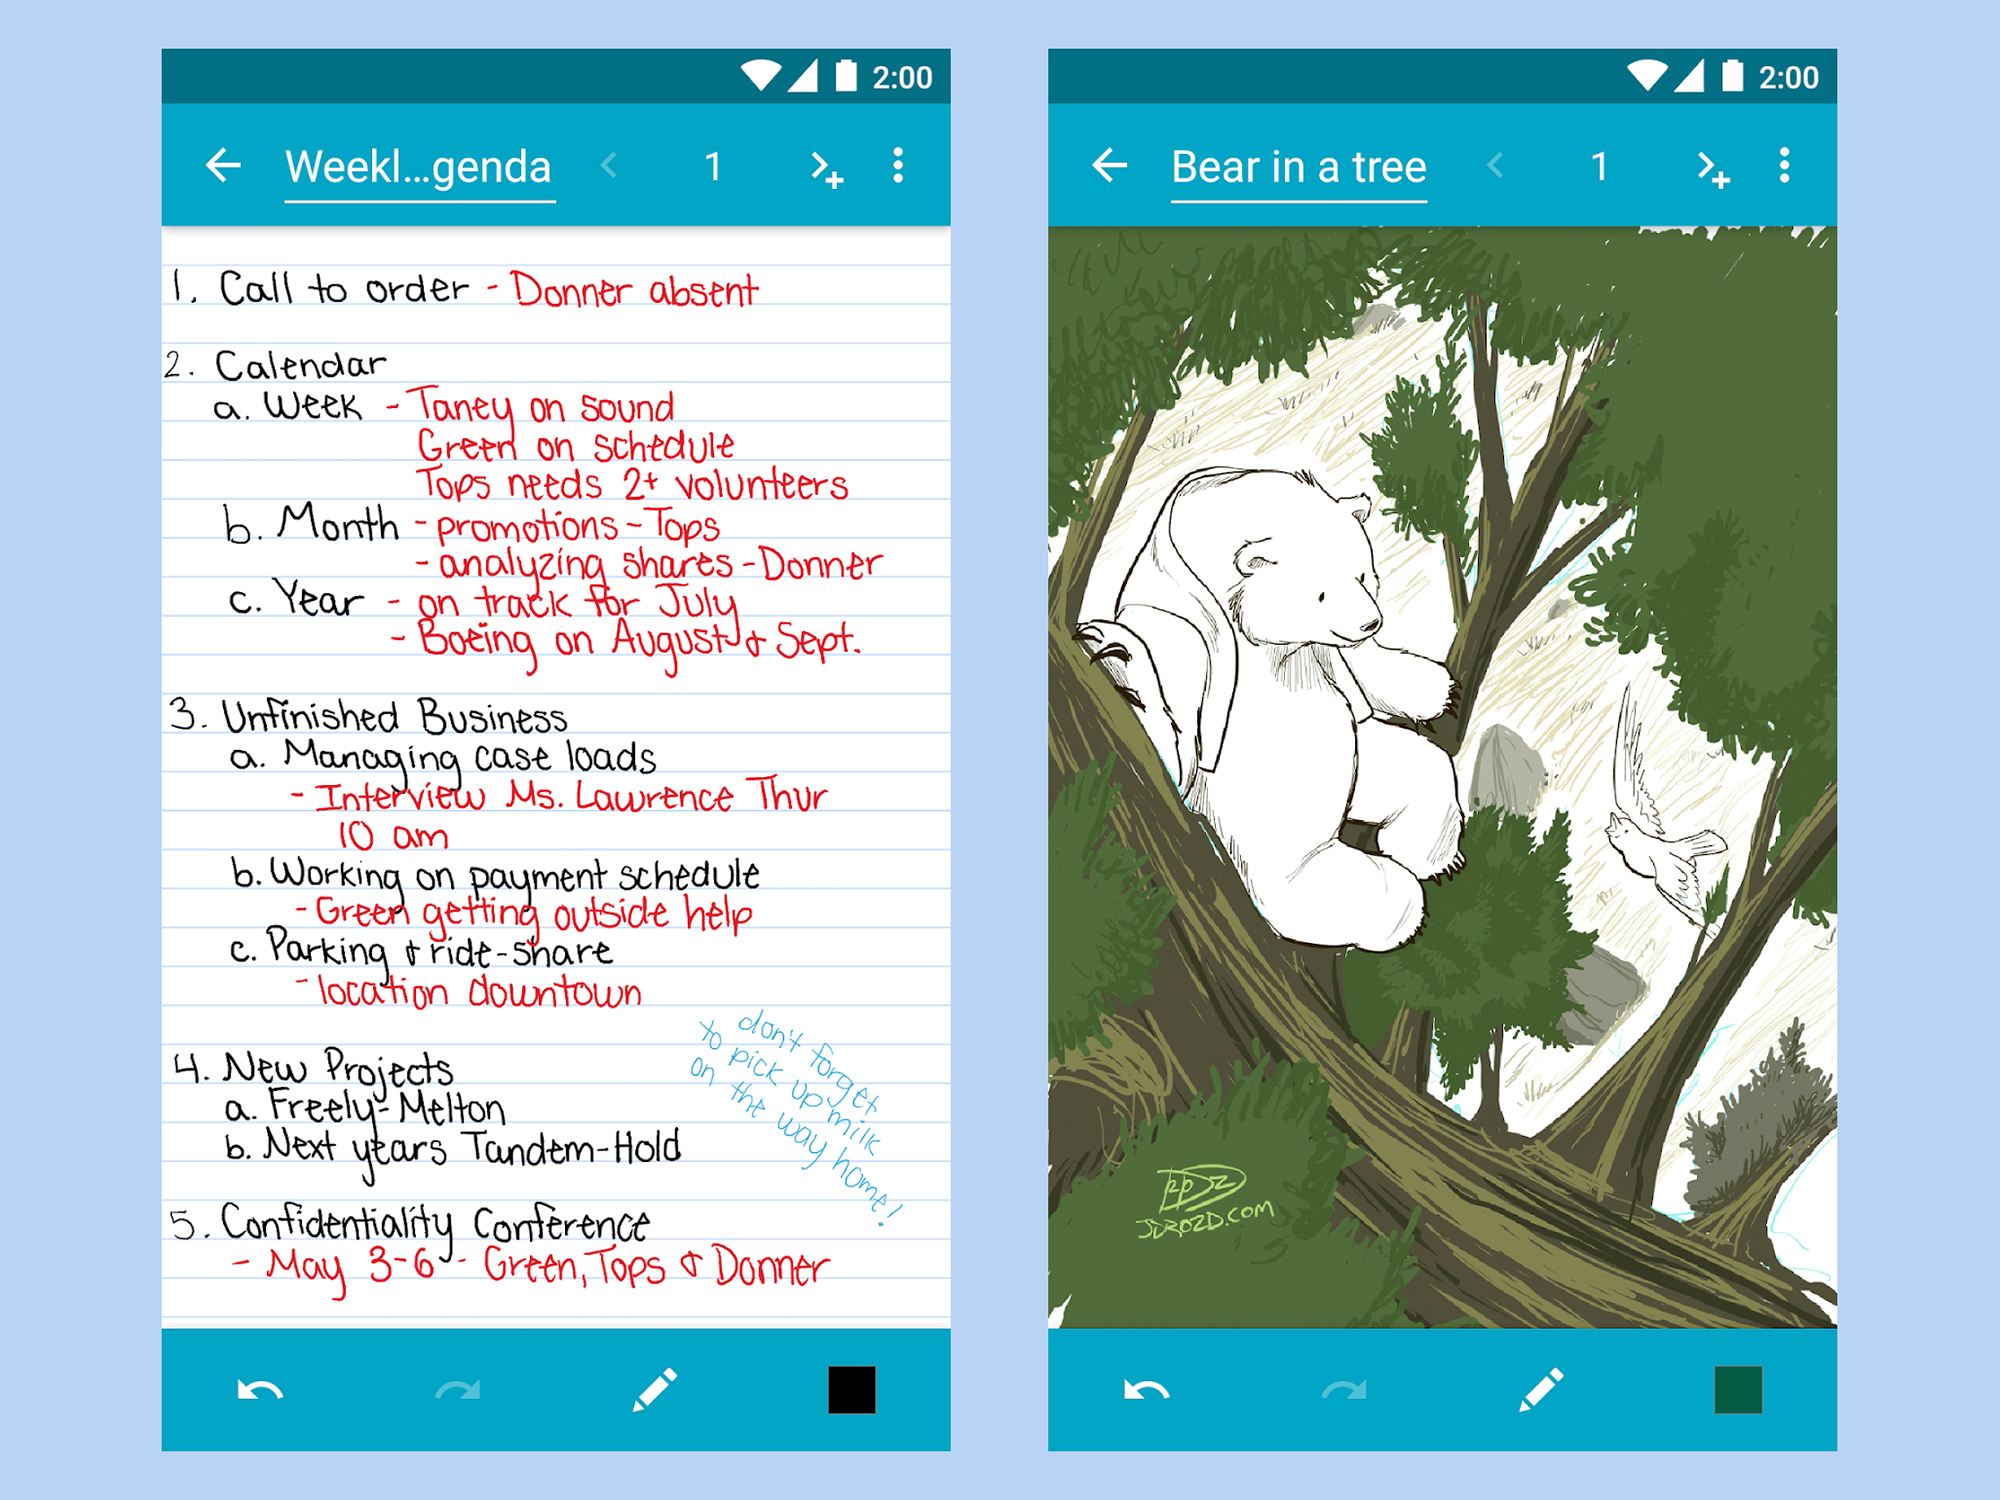 The Squid note taking app as it would appear on a phone screen, showing handwritten notes and a sketch.